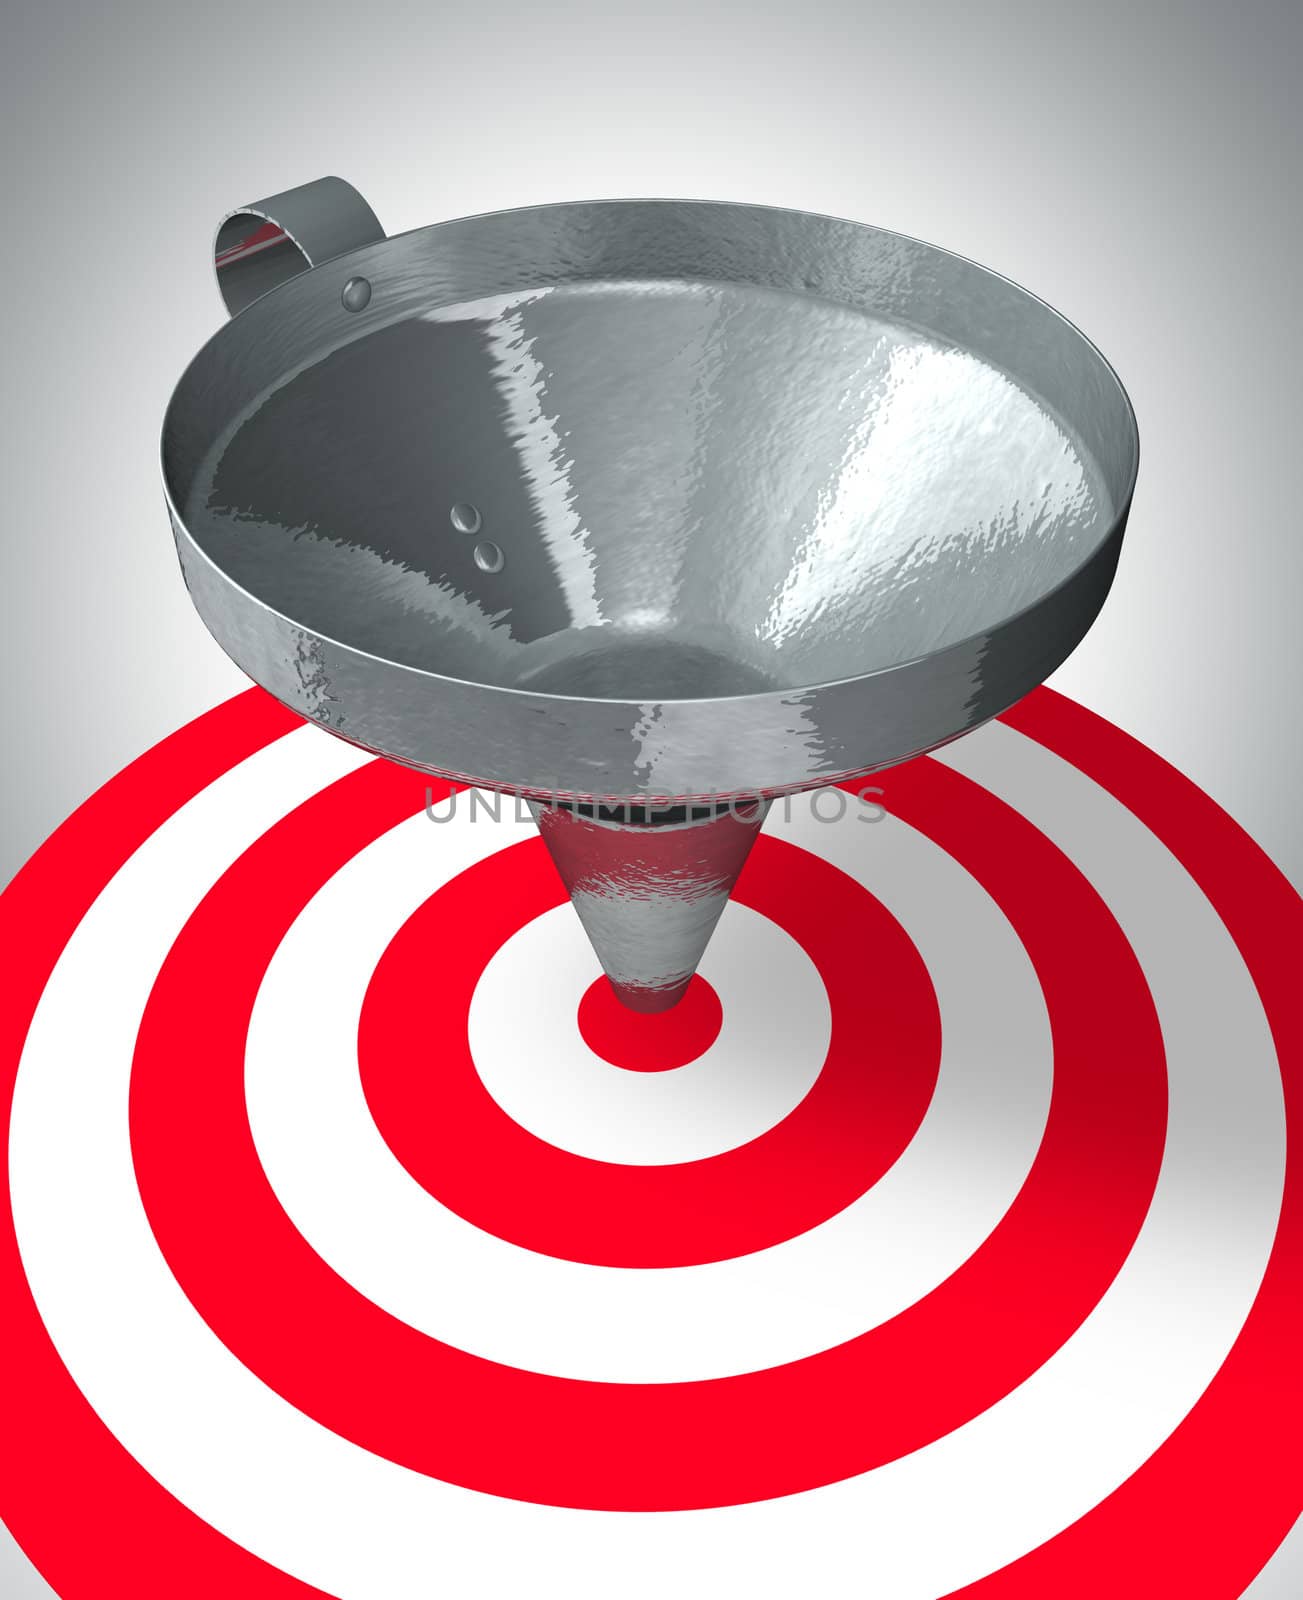 A funnel help to center the target - business concept